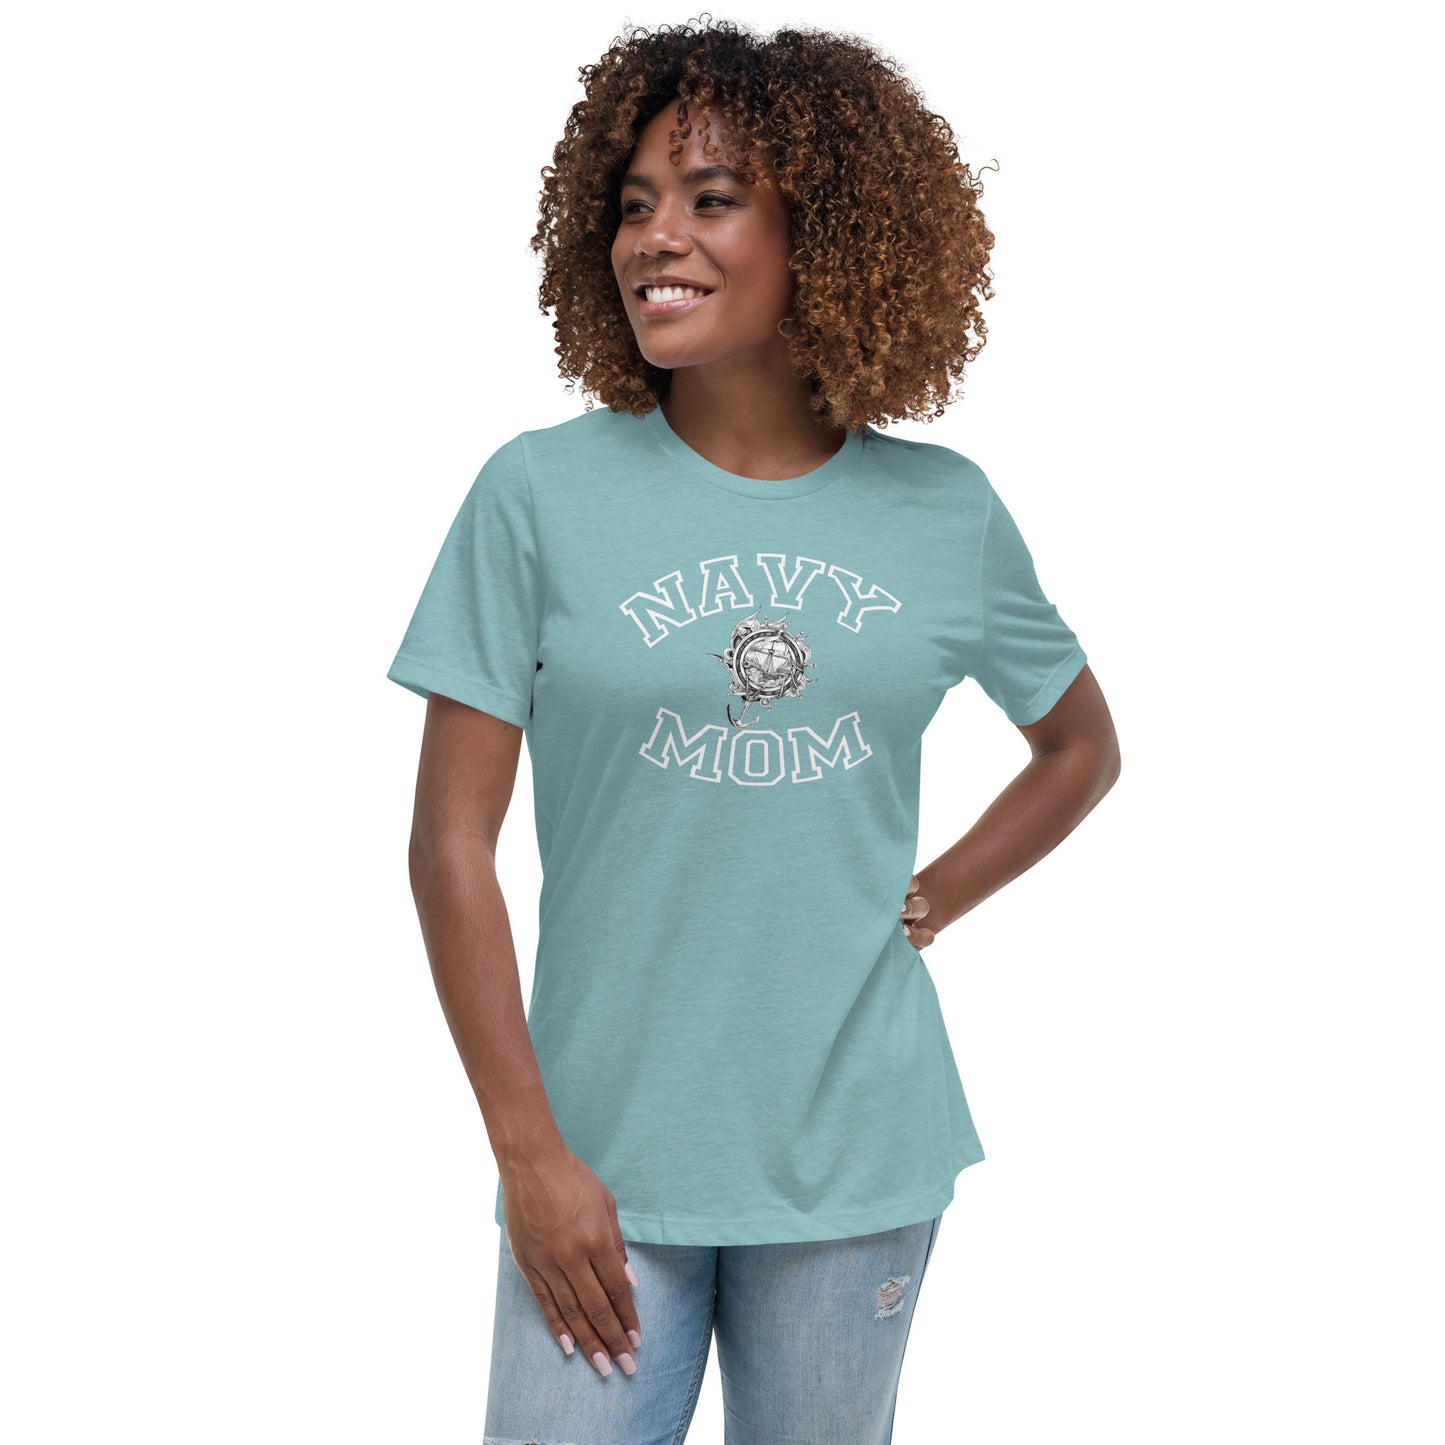 Navy Mom United States Navy Military Themed Women's Relaxed T-Shirt CedarHill Country Market